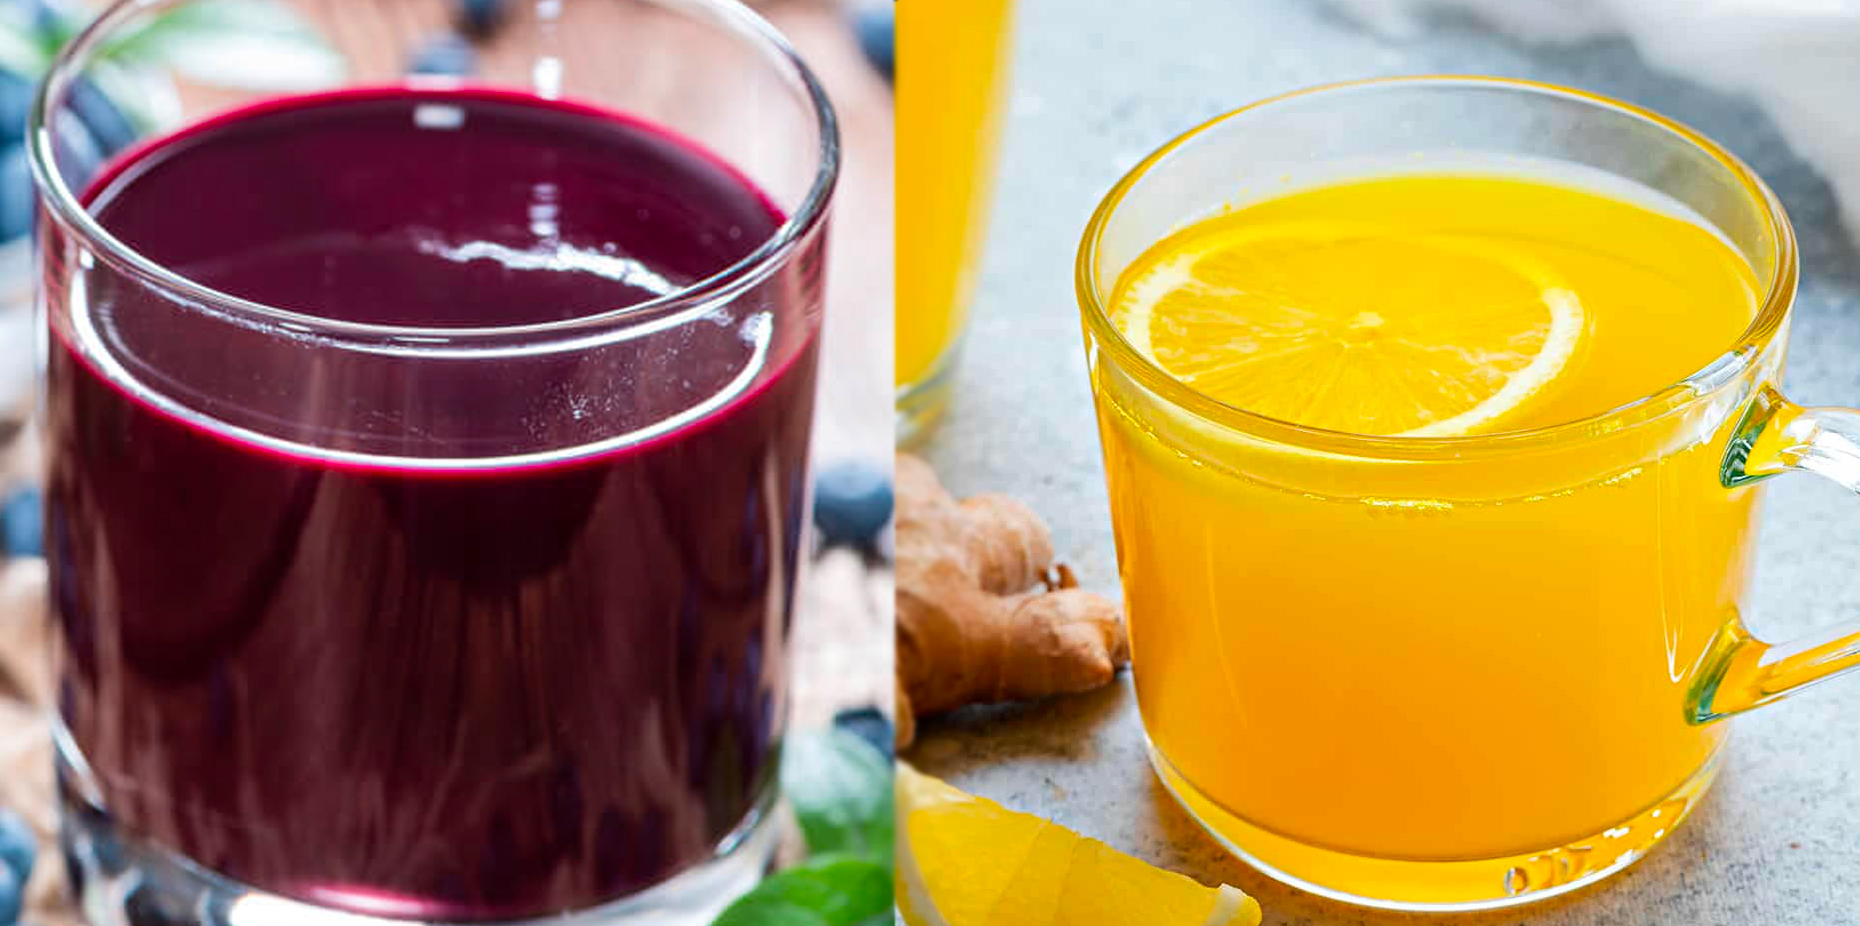 10 Juices and Drinks That Help Boost Brain Function